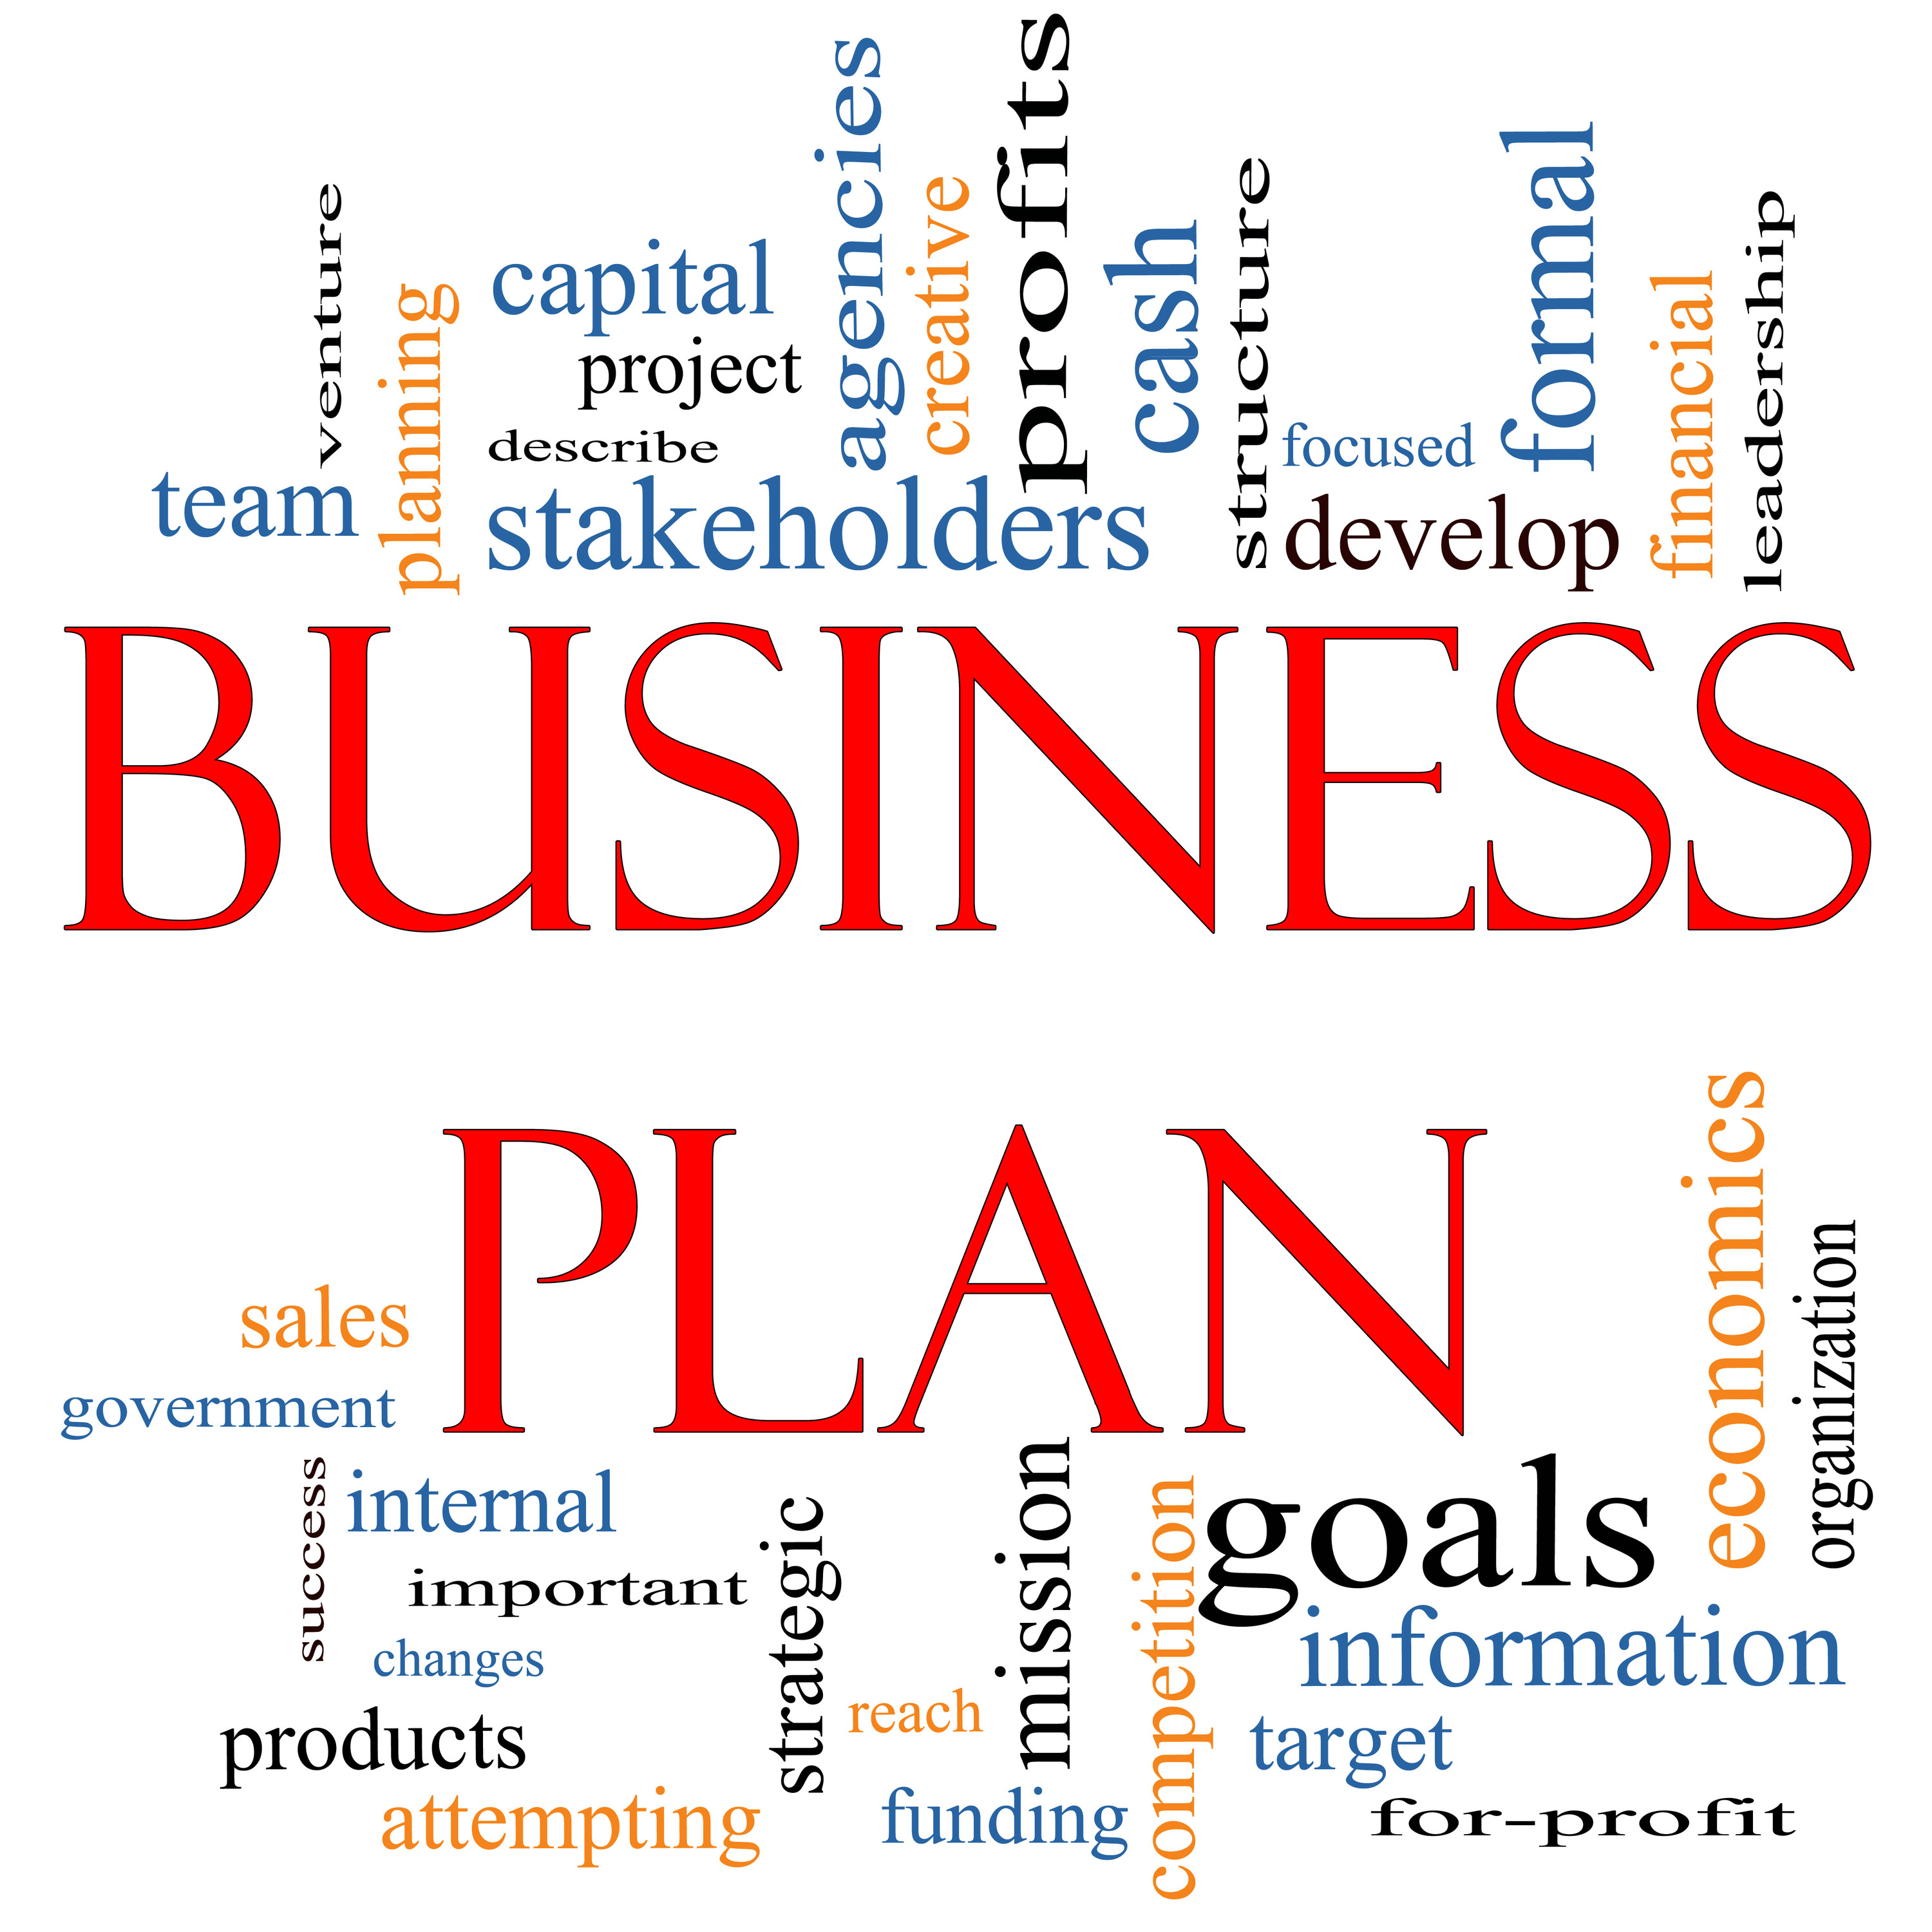 How To Create A Business Plan